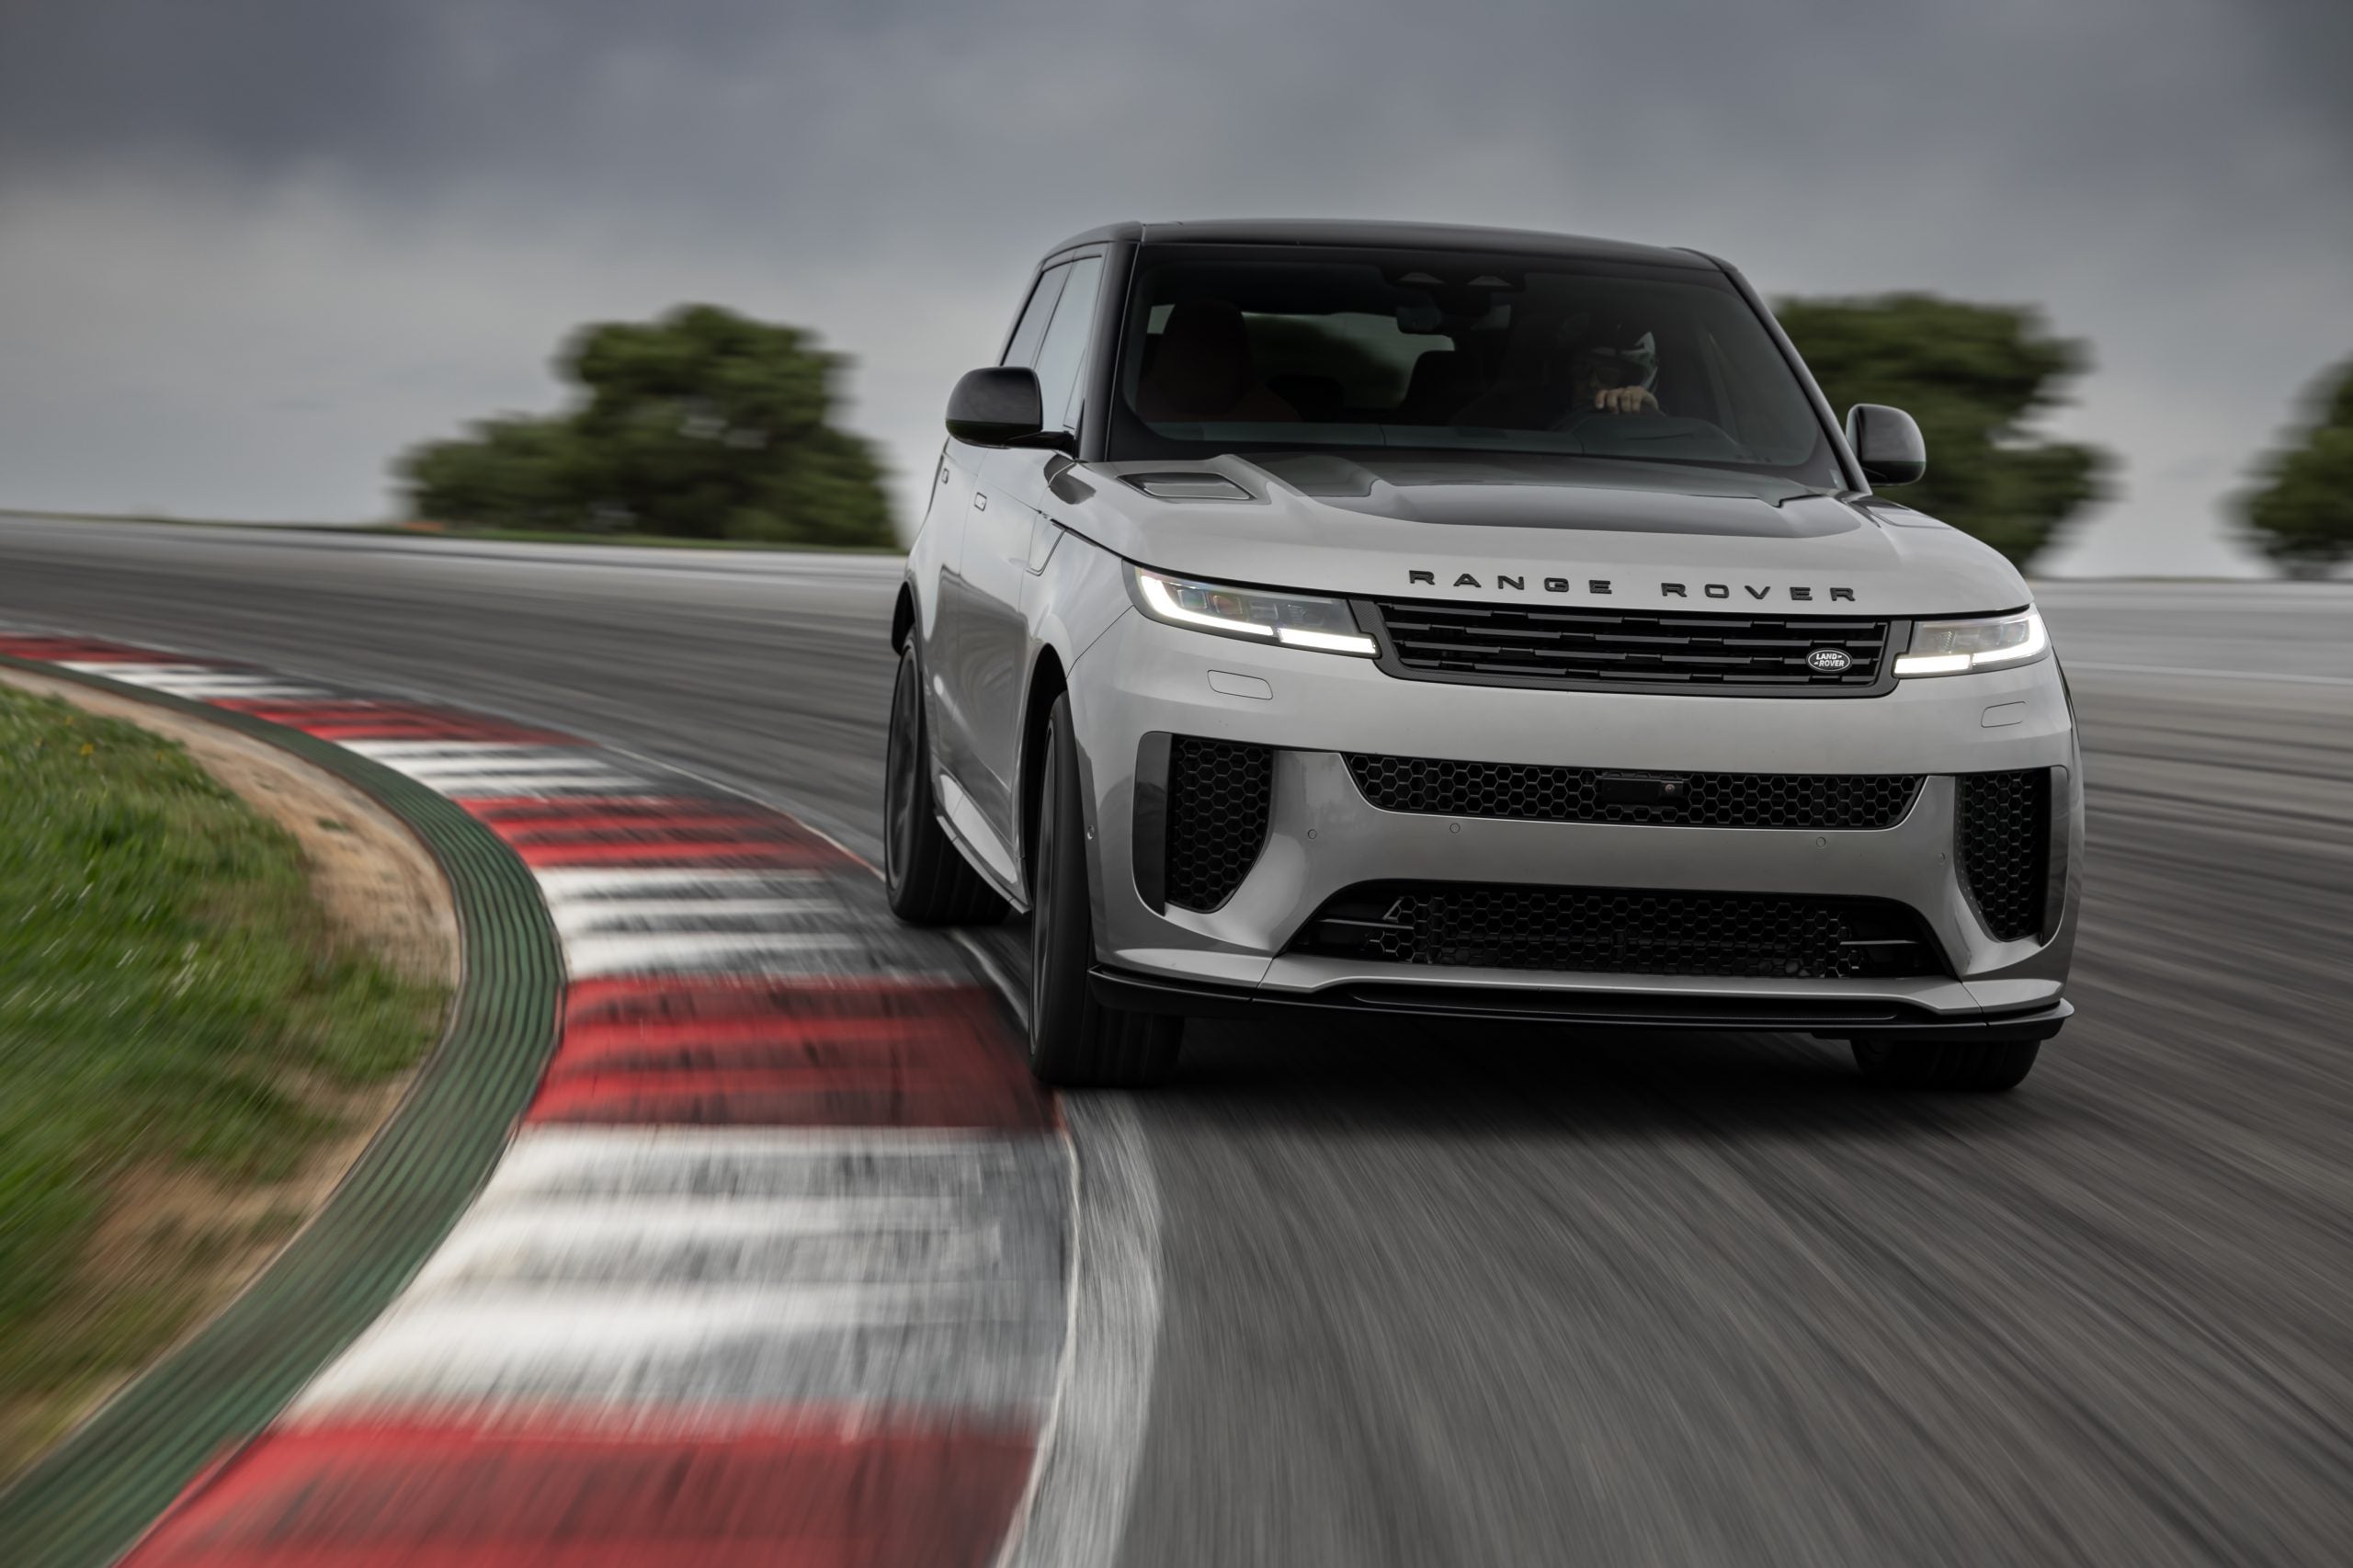 Get Yourself A Car That Can Do Both: The New Range Rover Sport SV Is Fast And Incredibly Functional